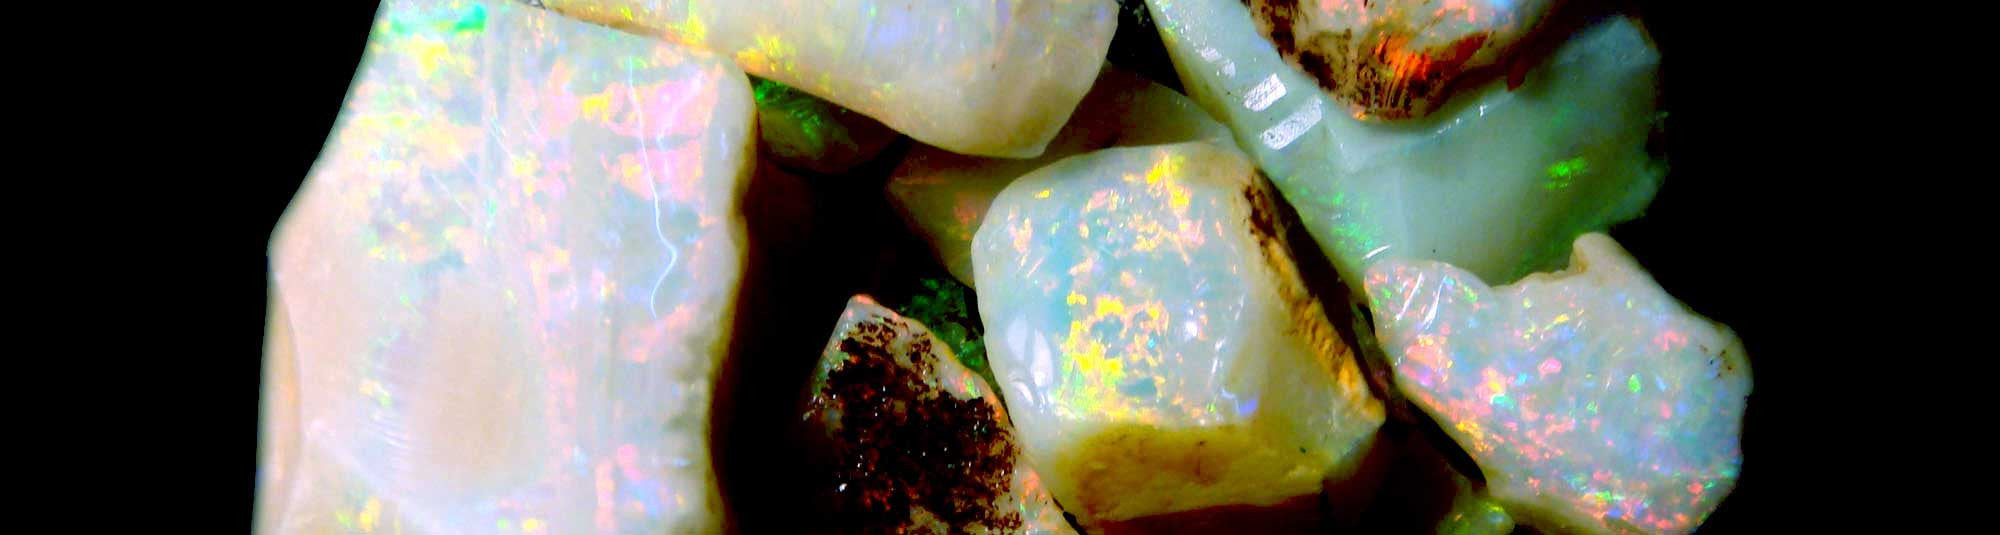 banner image - Opal mining and jewellery